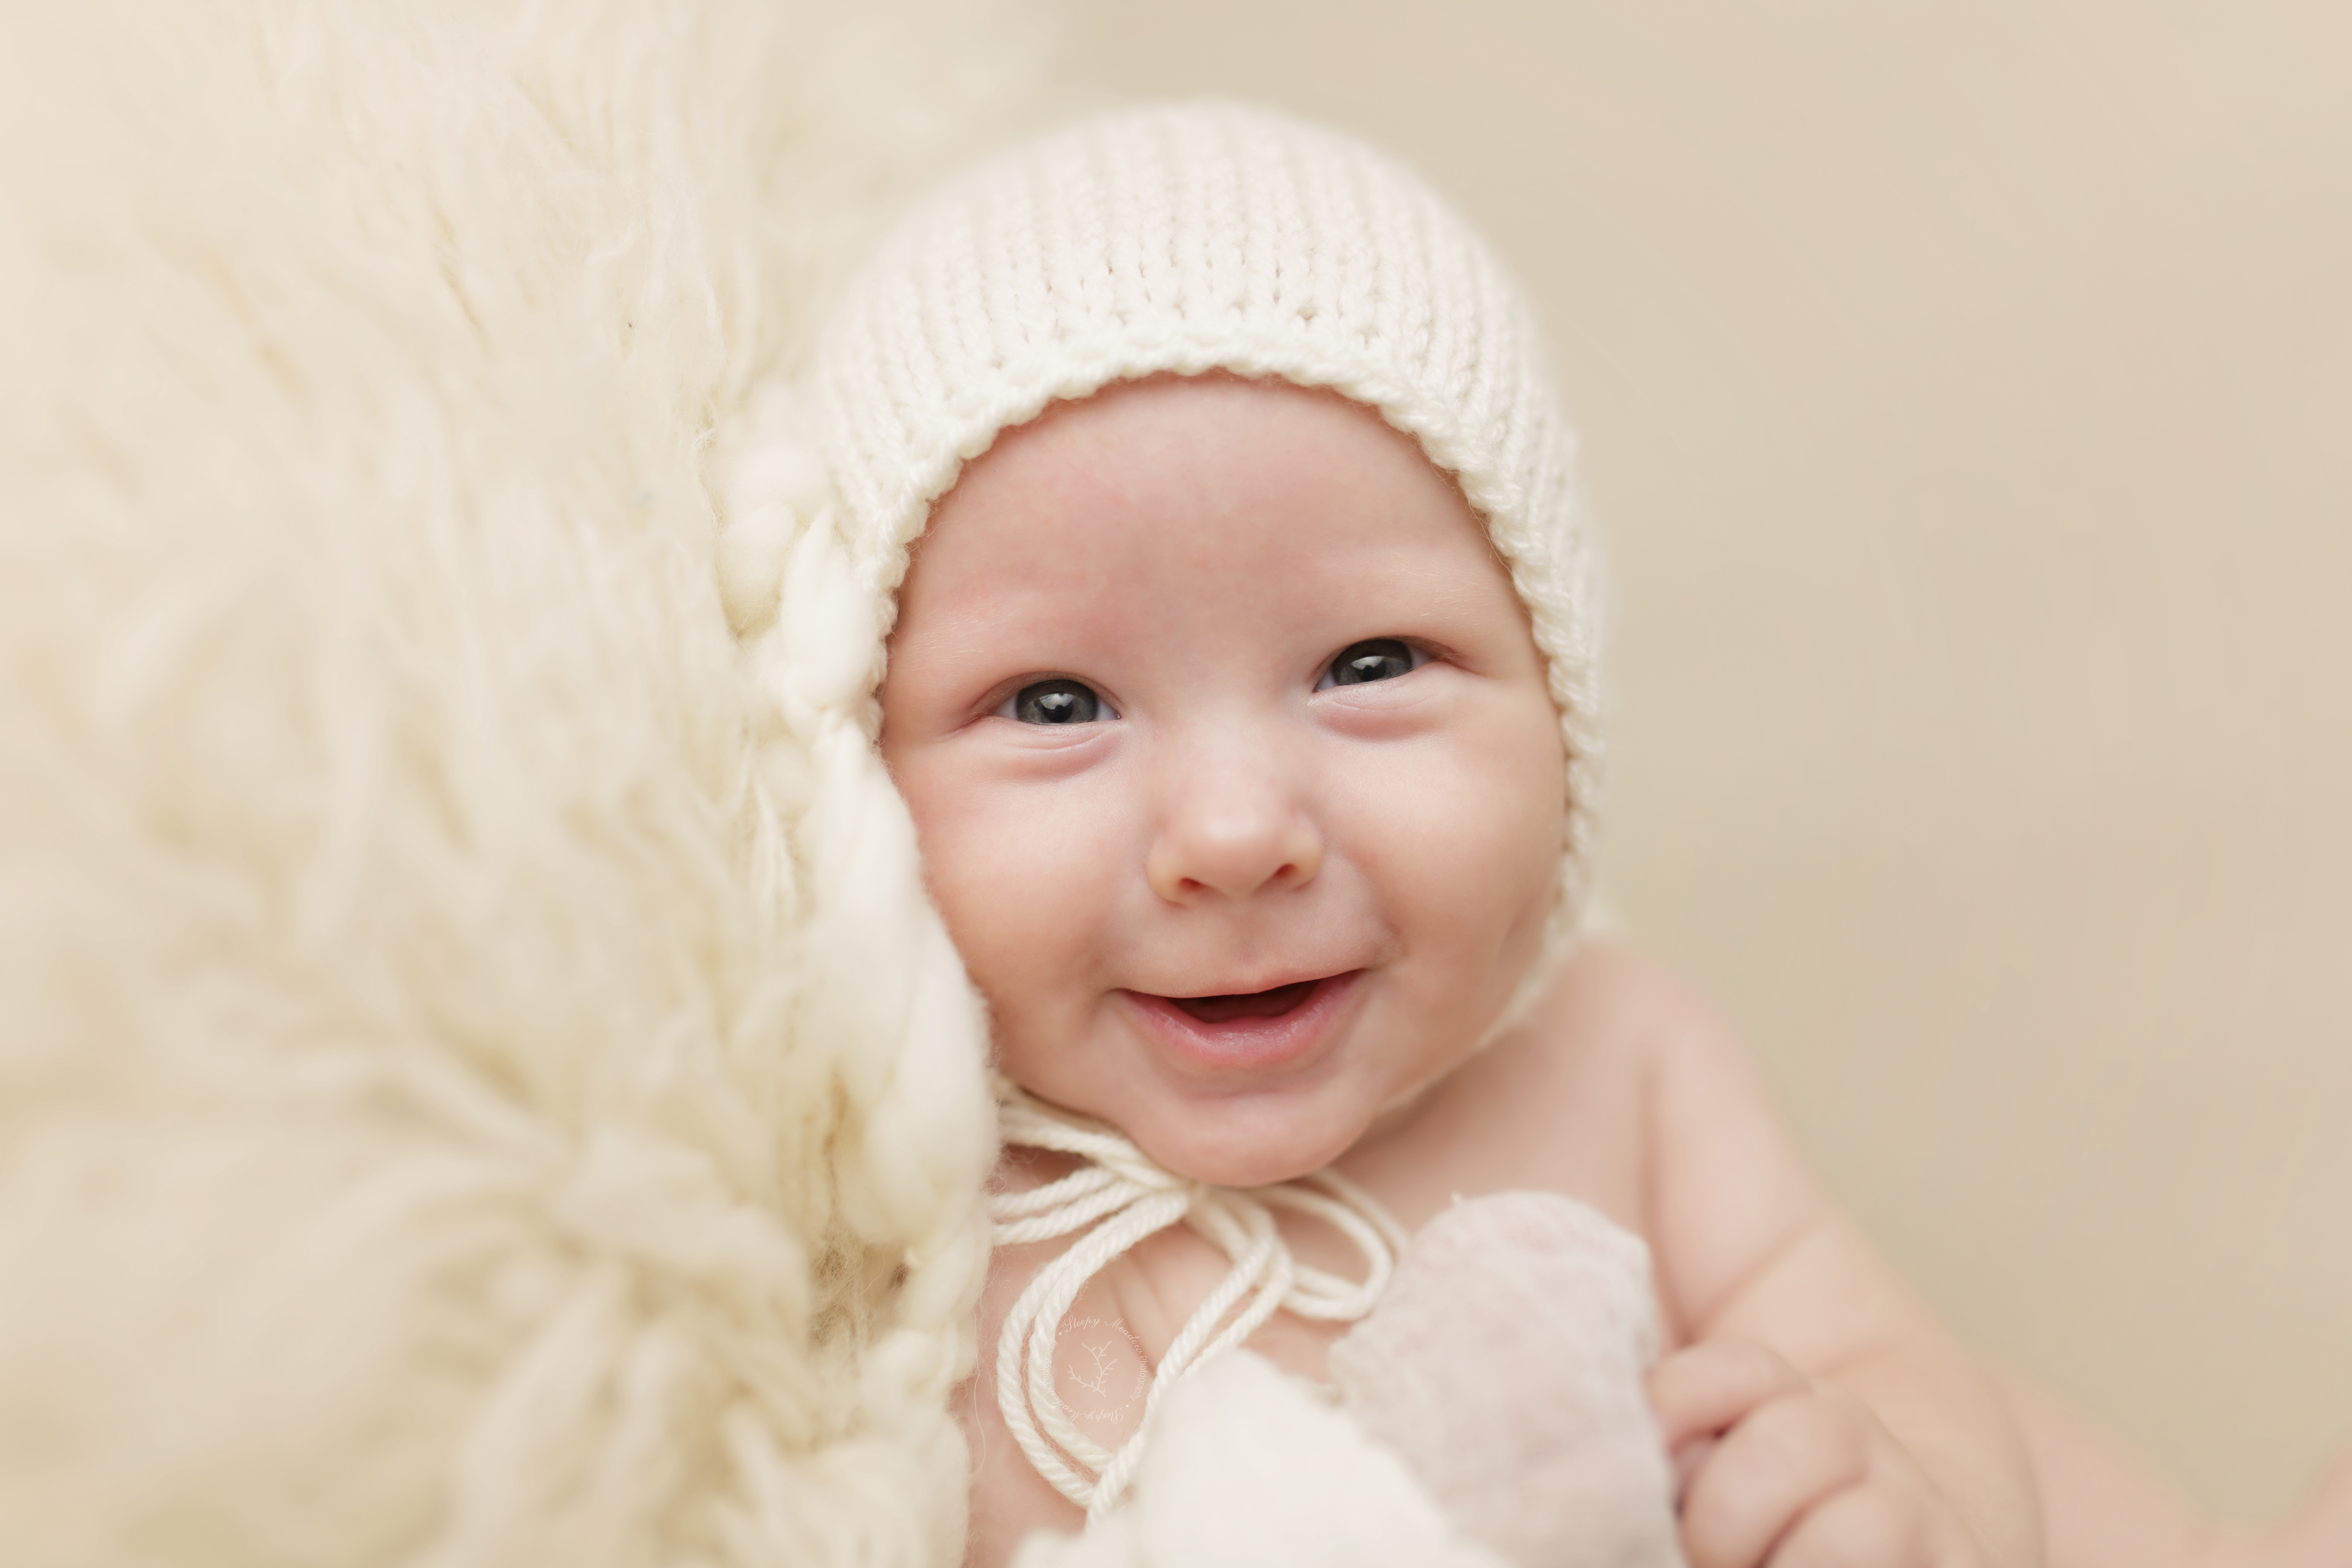 Evan wears a bonnet for his 3 month old photoshoot.